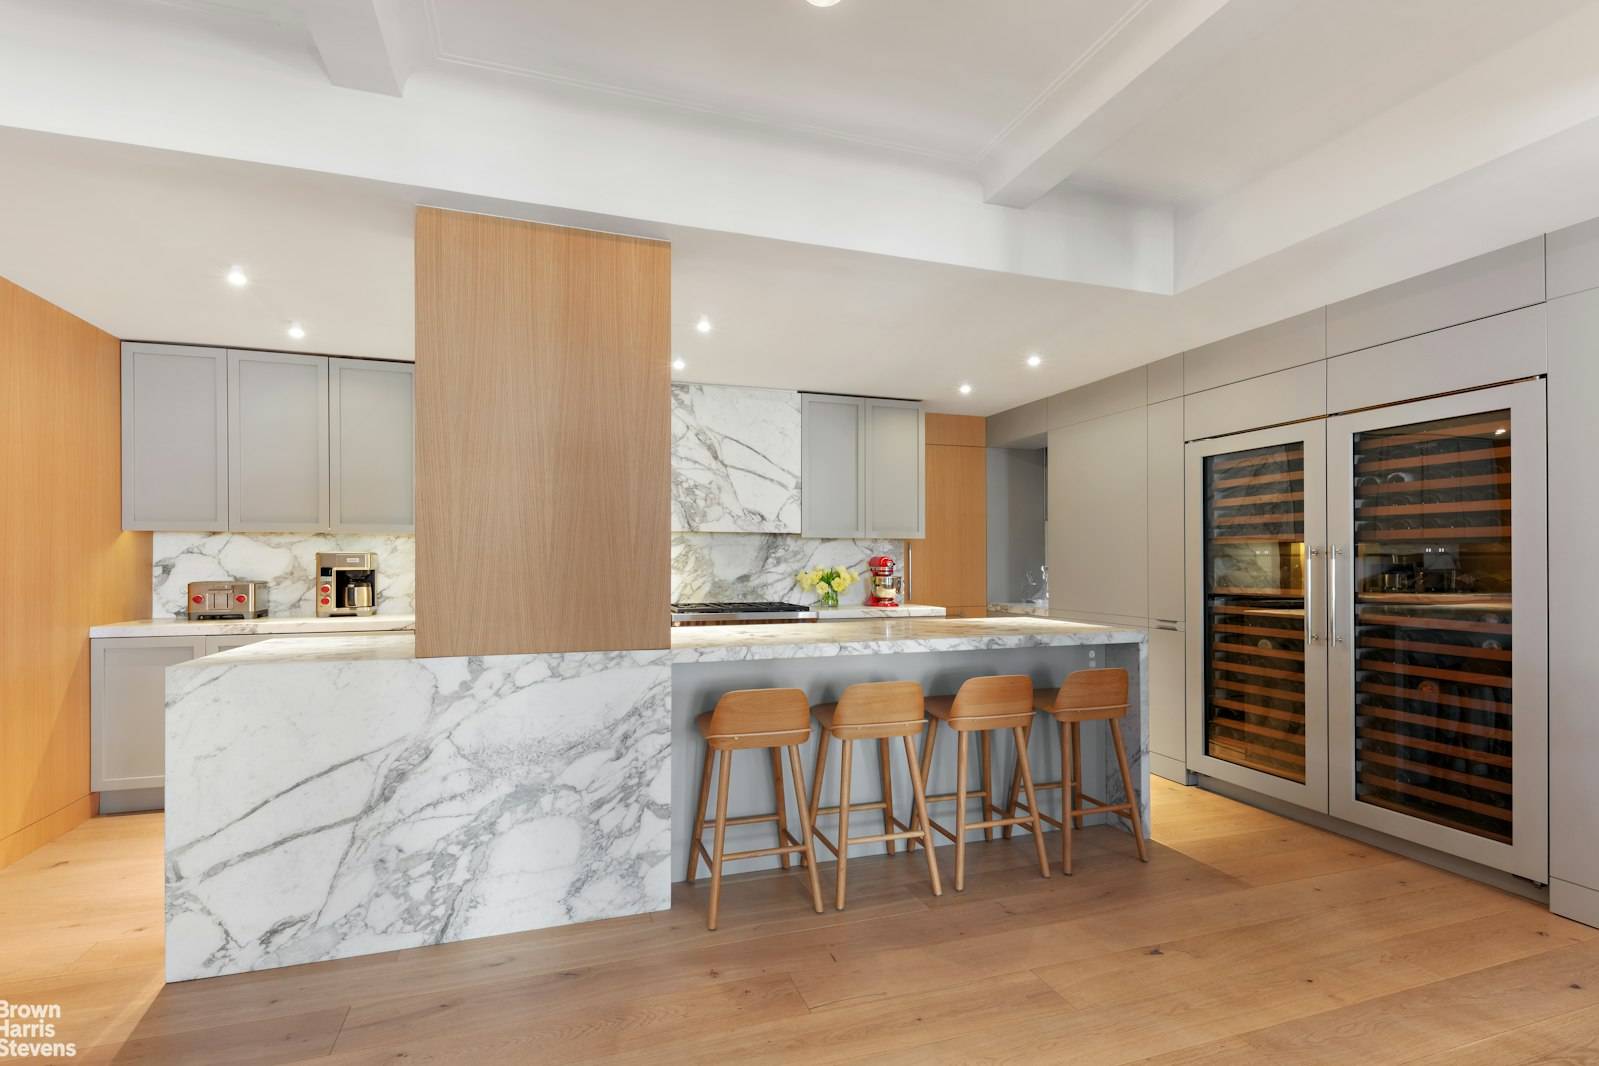 Recently gut renovated by the esteemed Stewart Schafer Architects and featured in Dwell magazine, this 3 bedroom, 2.